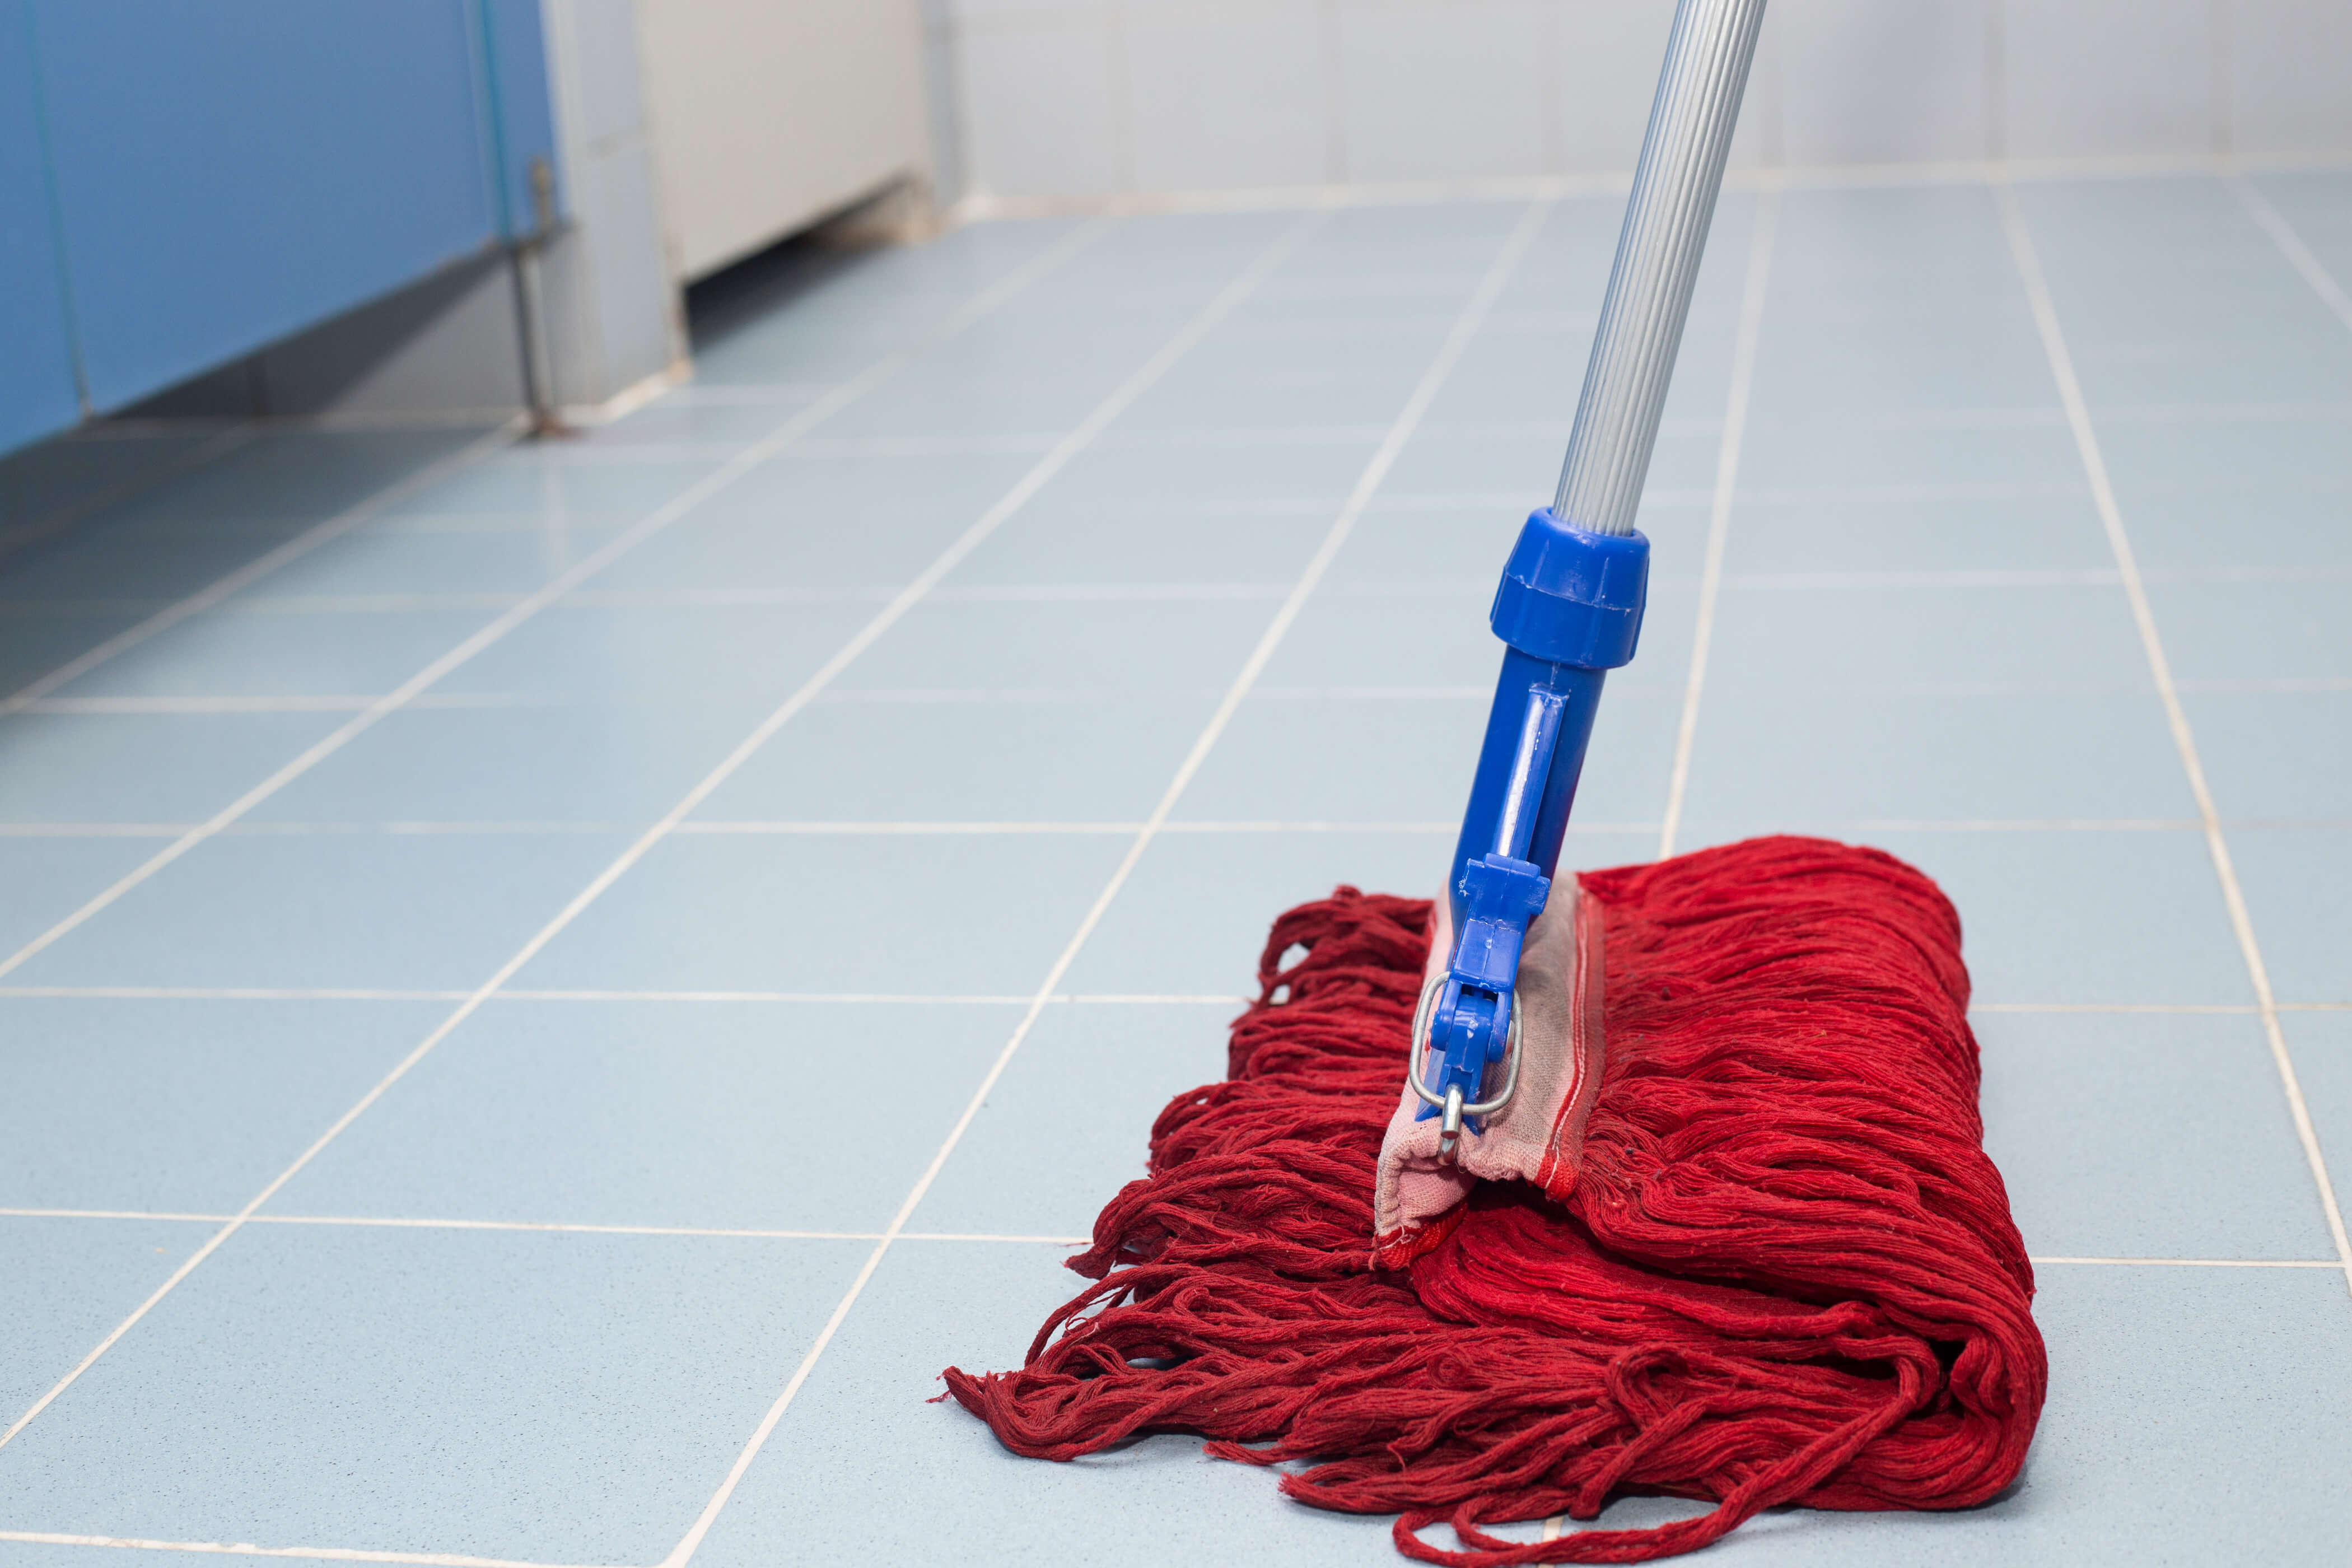 A mop wipes the floor of a rest room, which caused an accident at work